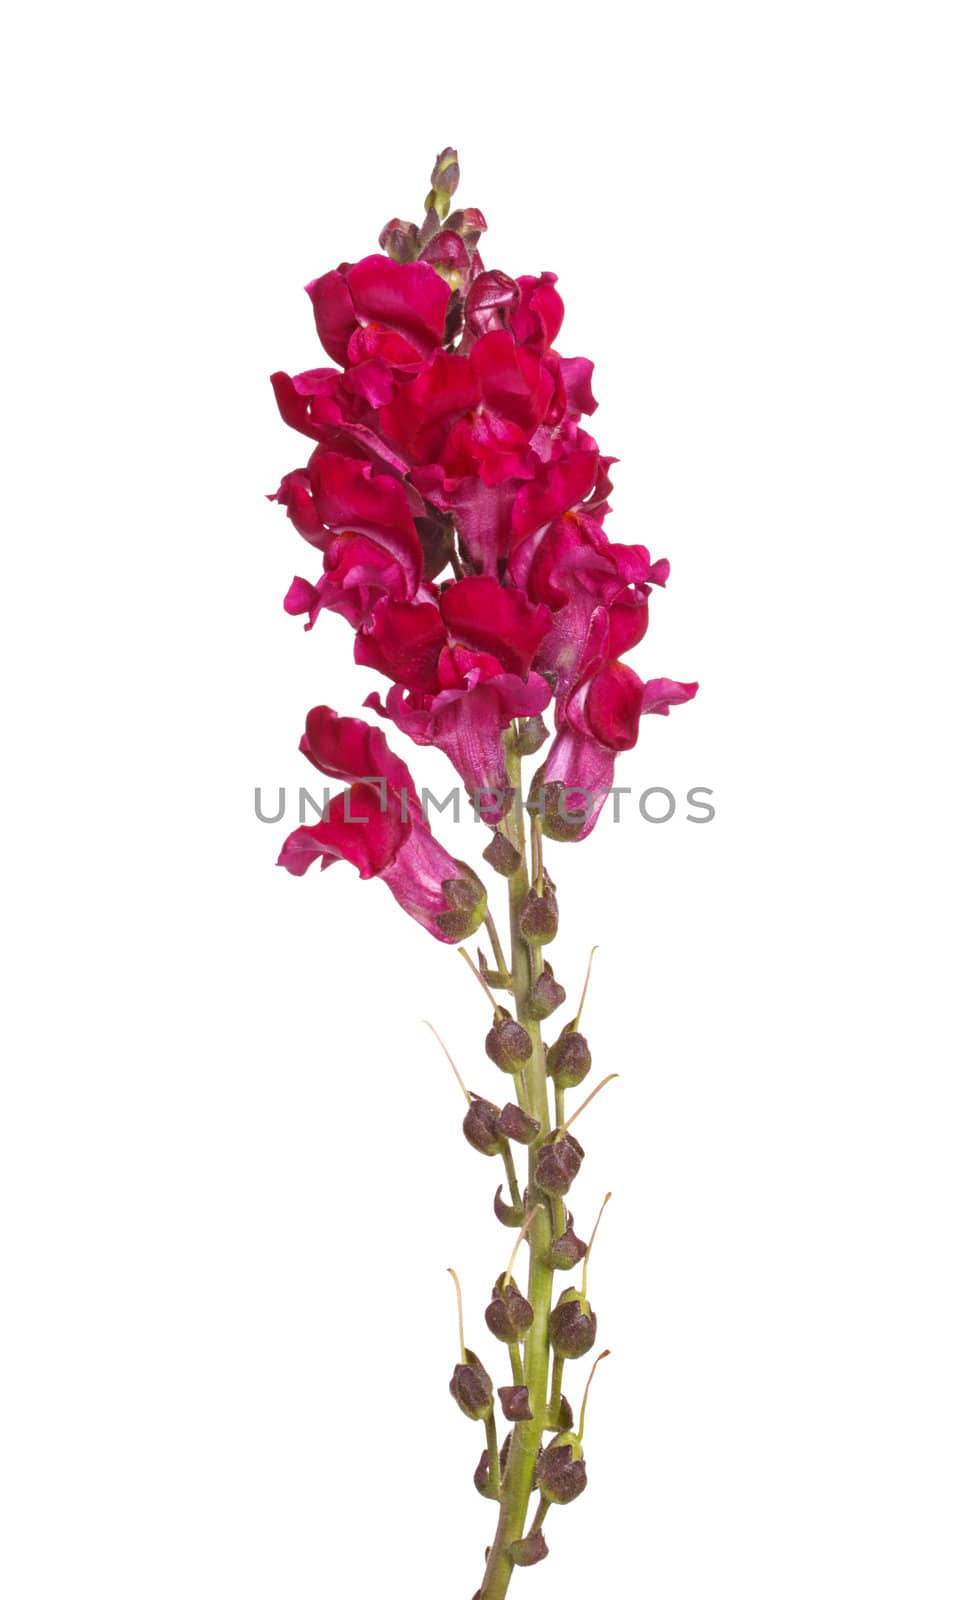 Single stem with red flowers of snapdragon (Antirrhinum majus) isolated against a white background